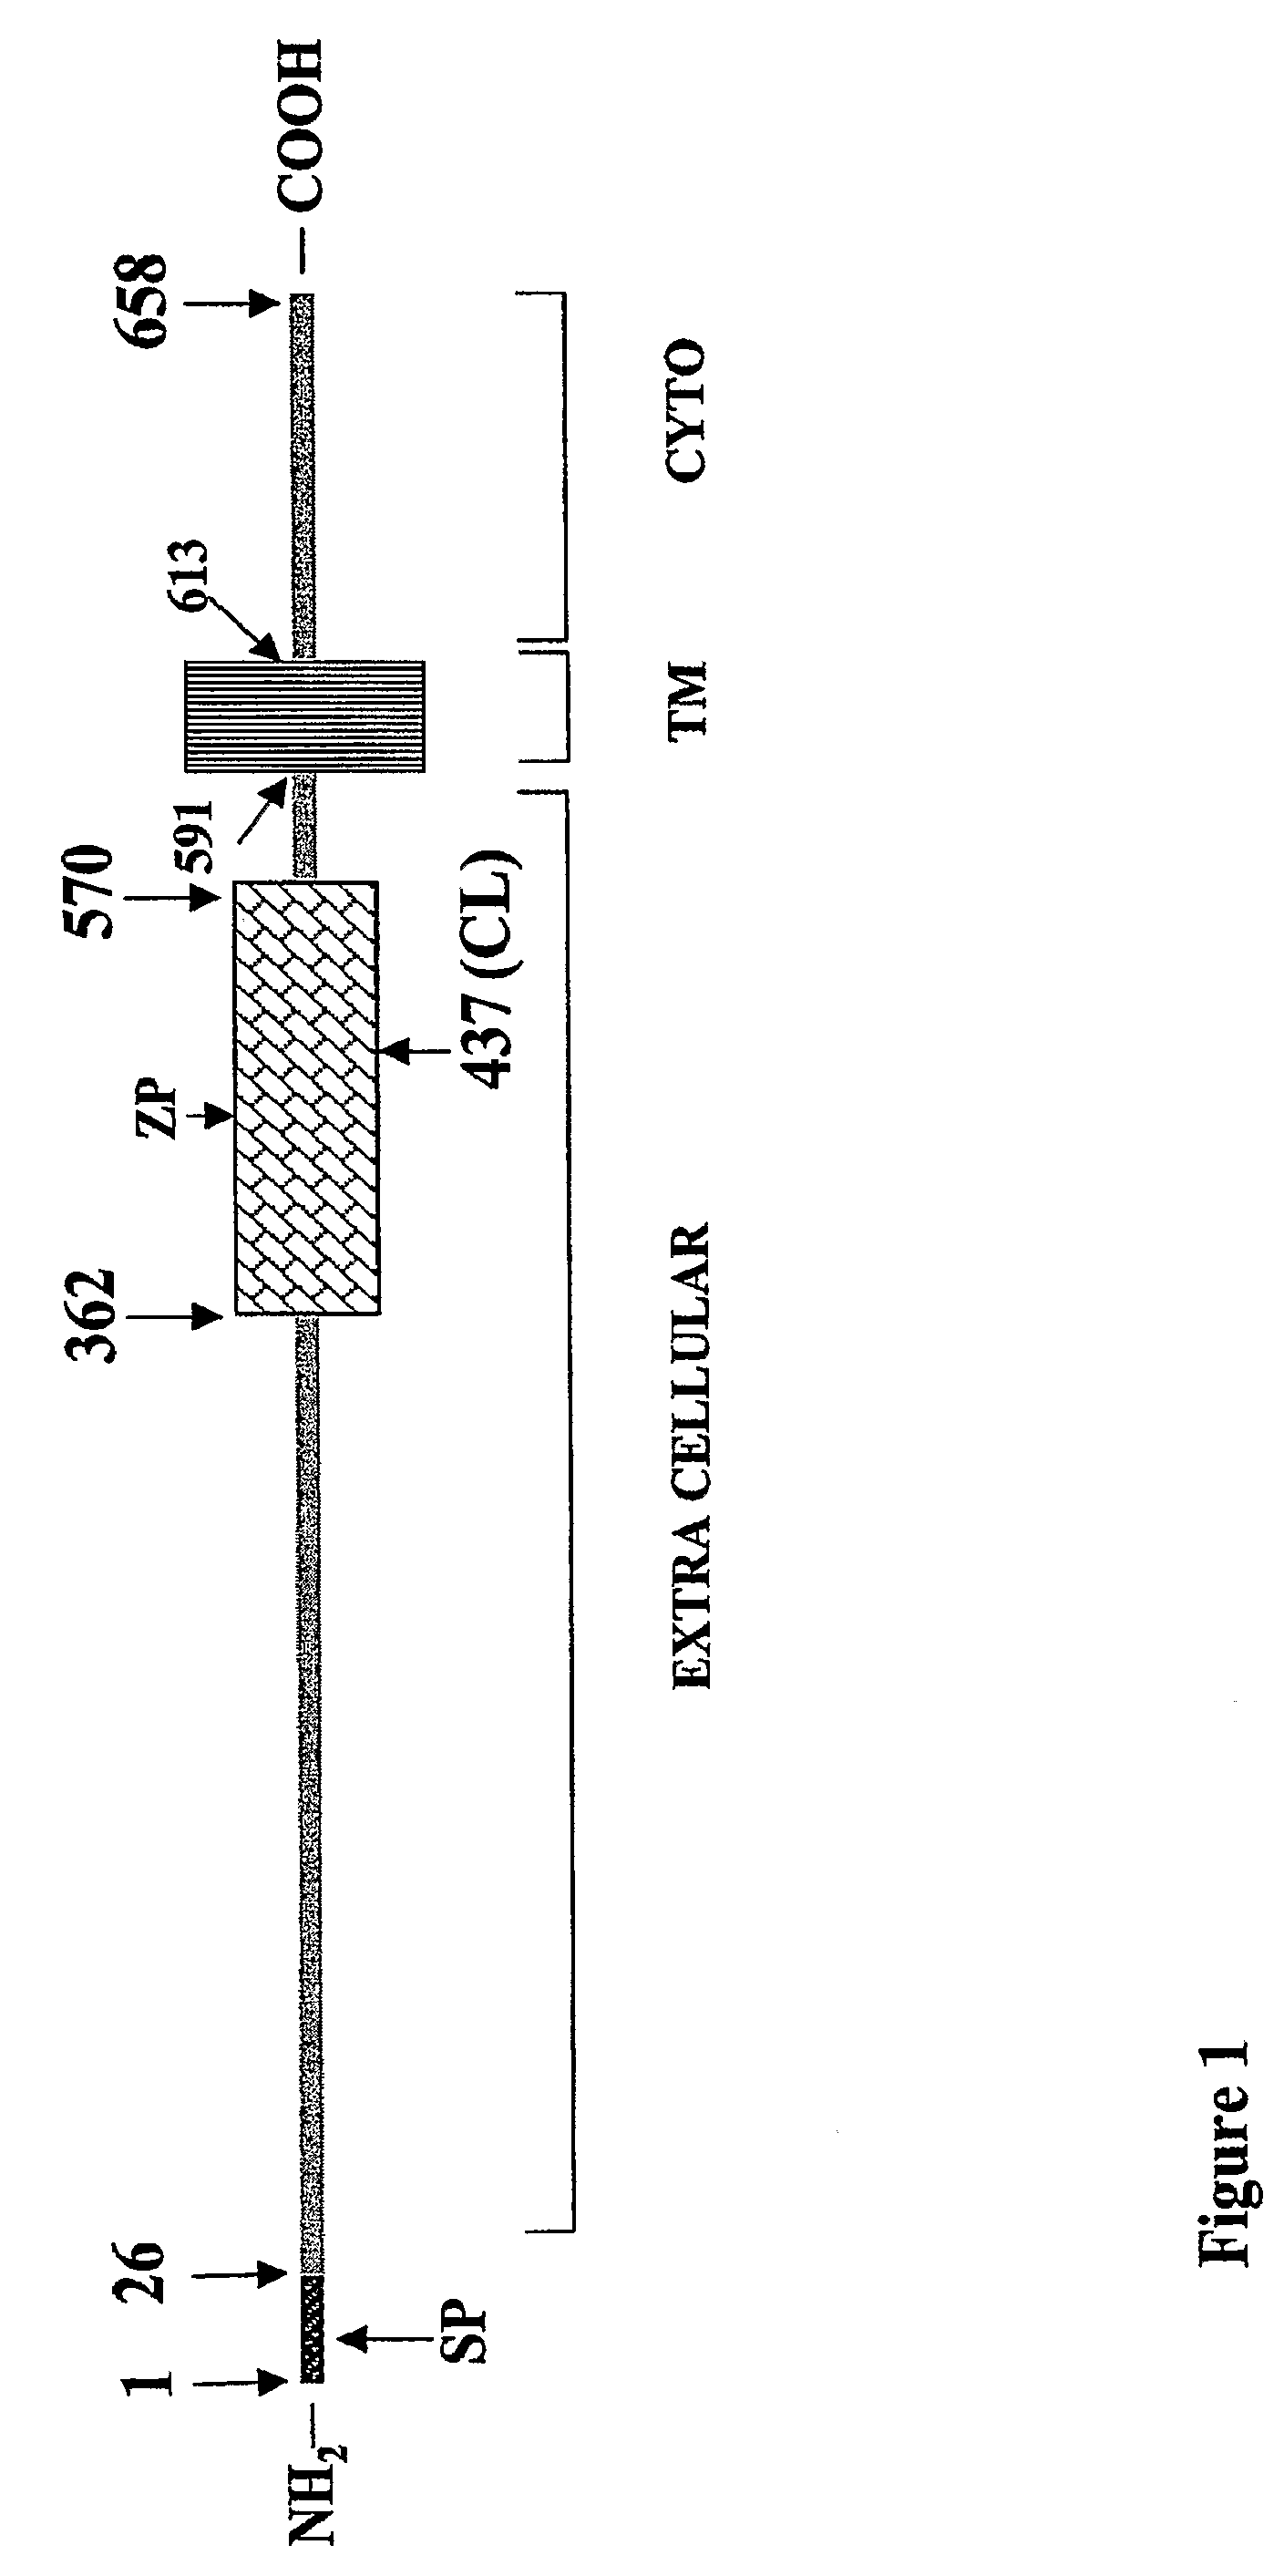 Soluble Endoglin Compounds for the Treatment and Prevention of Cancer